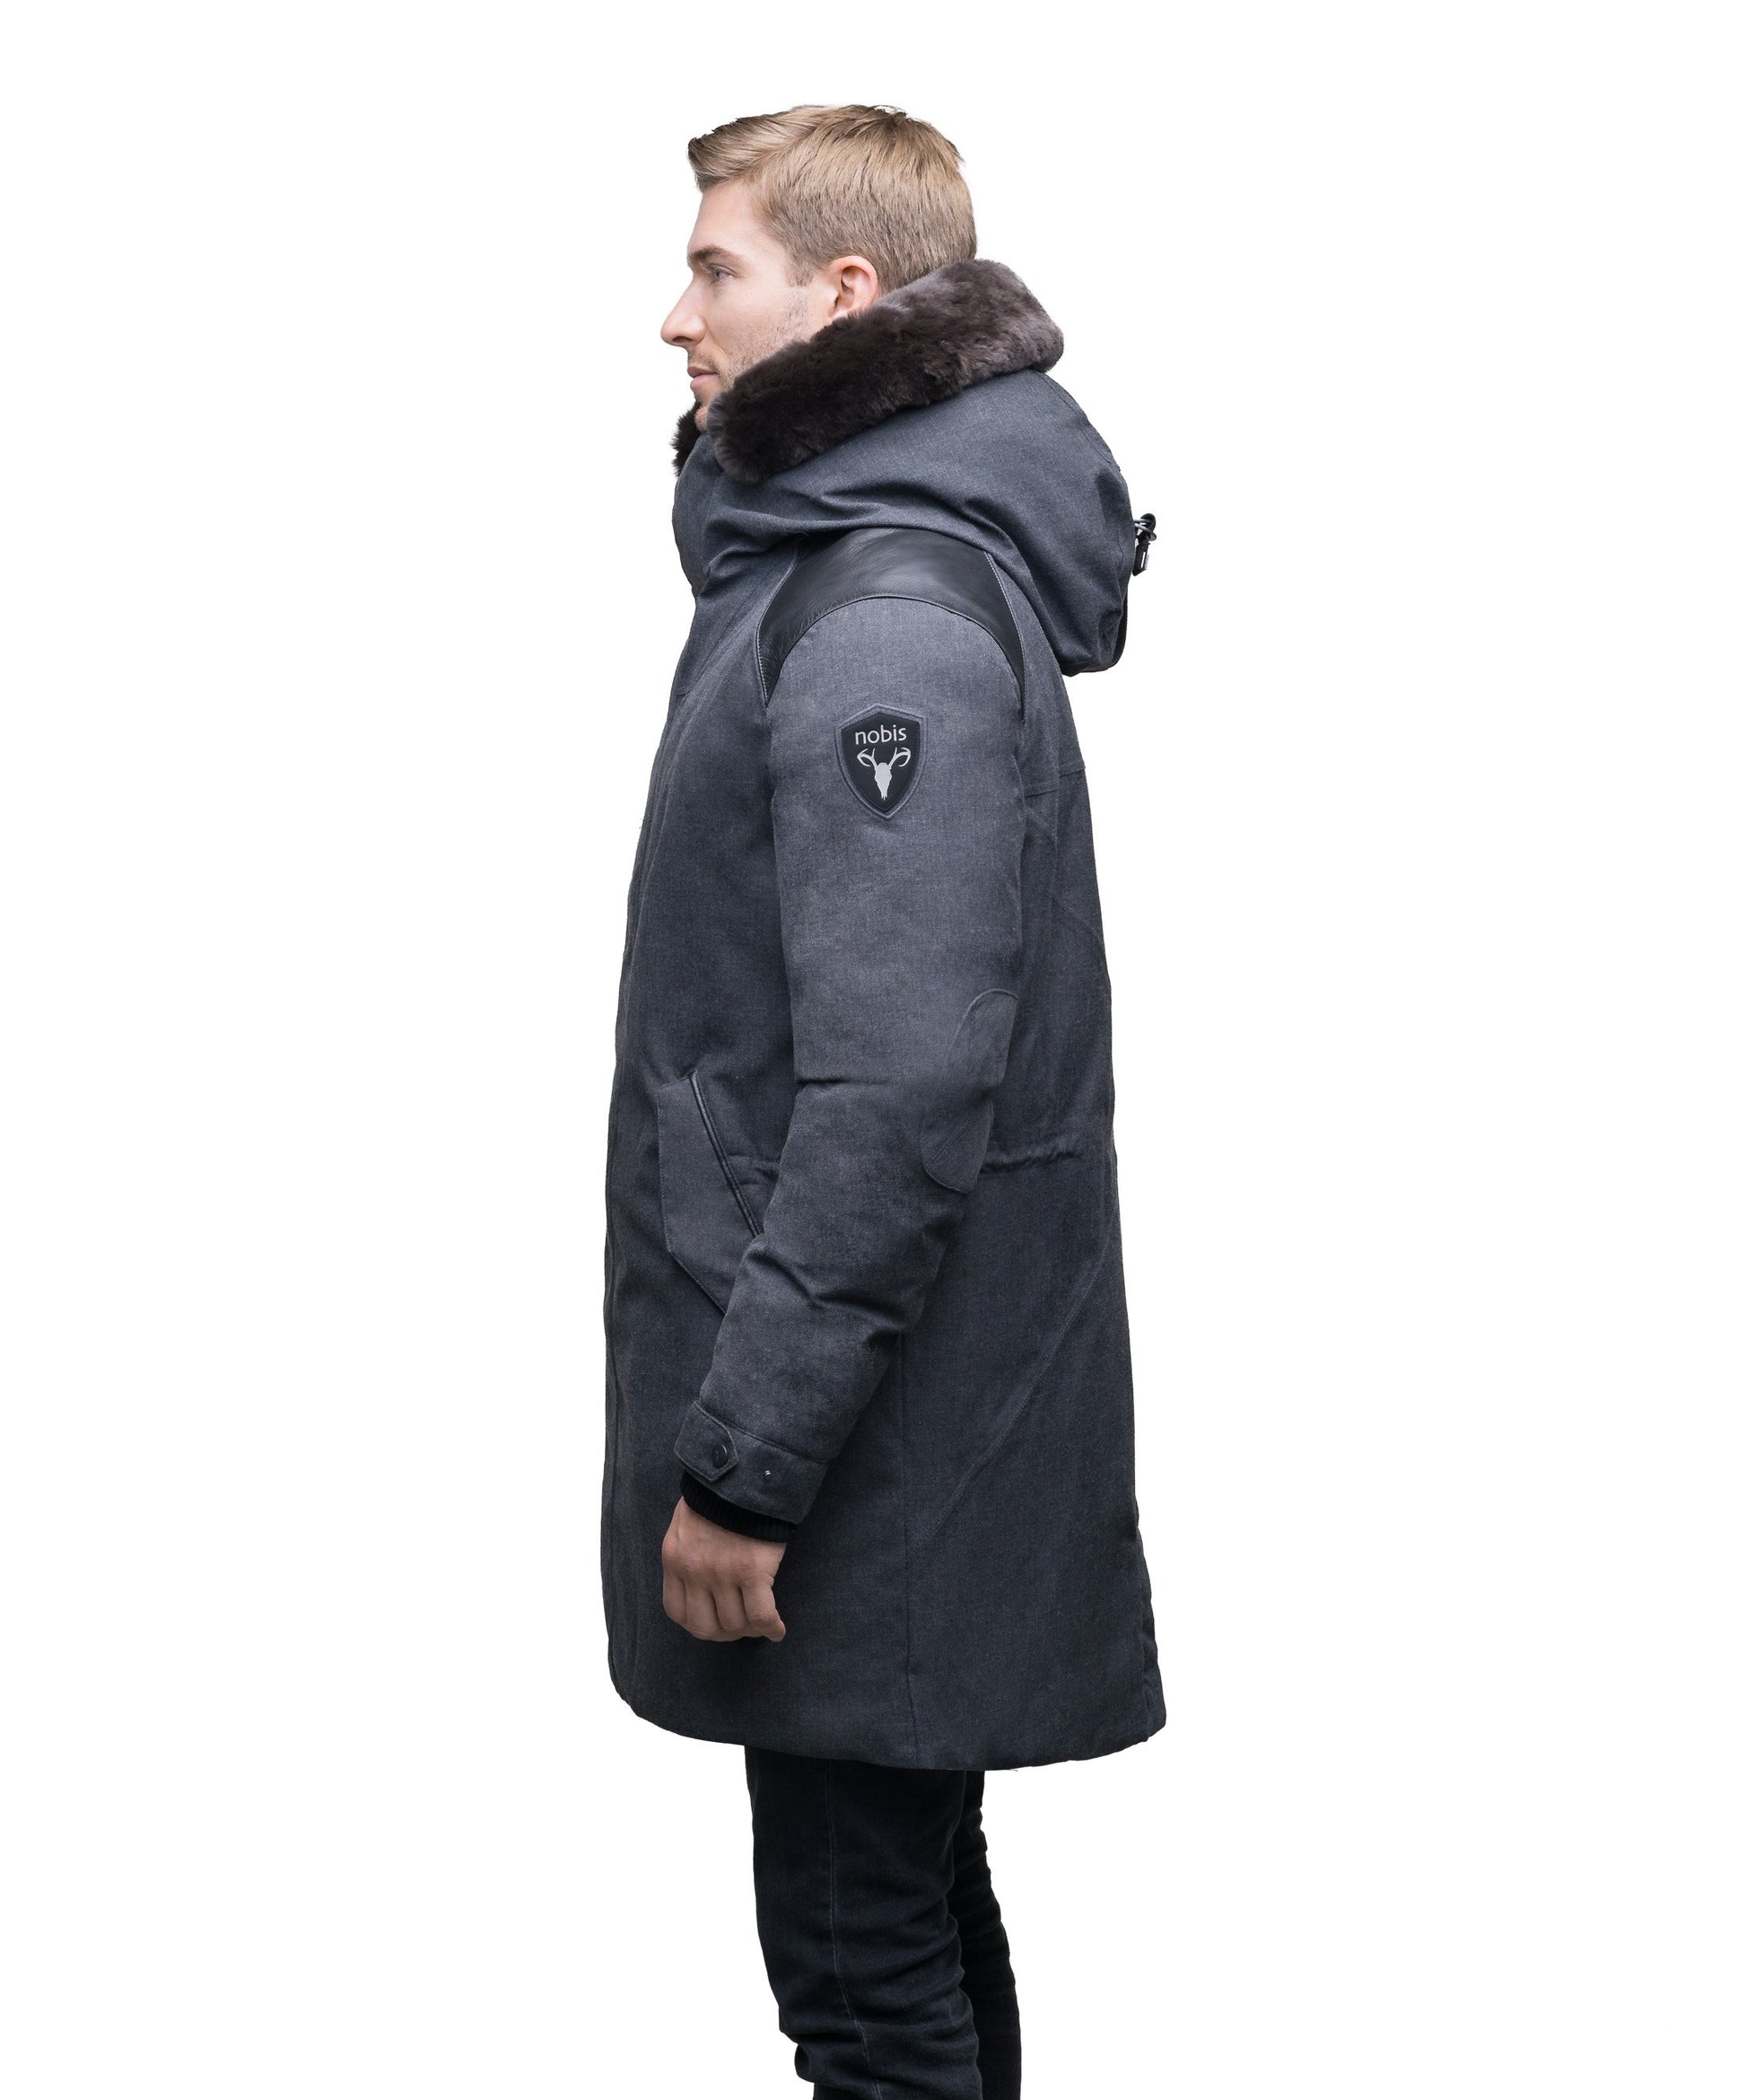 Men's down filled overcoat with premium washable Japanese DWR leather on both shoulders in H. Charcoal or H Black